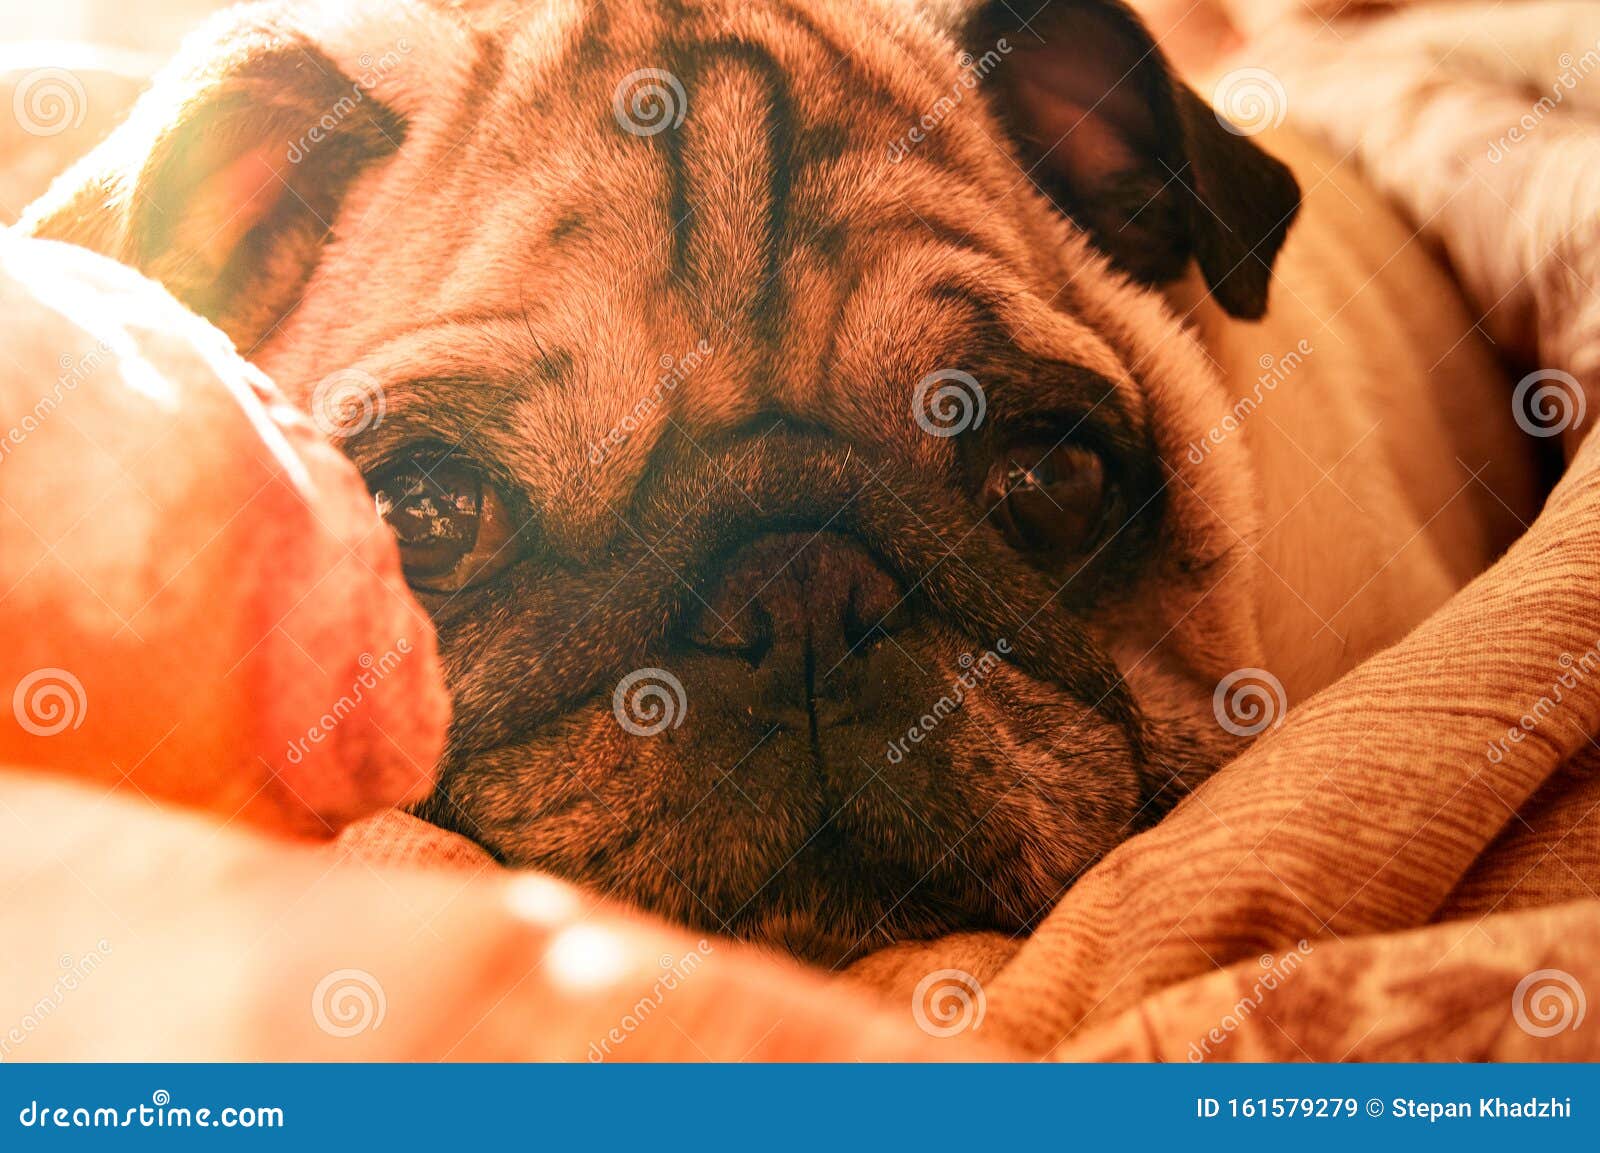 A Sleepy Pug Looks At The Camera Attractive Dog Look Stock Image Image Of Love Curiosity